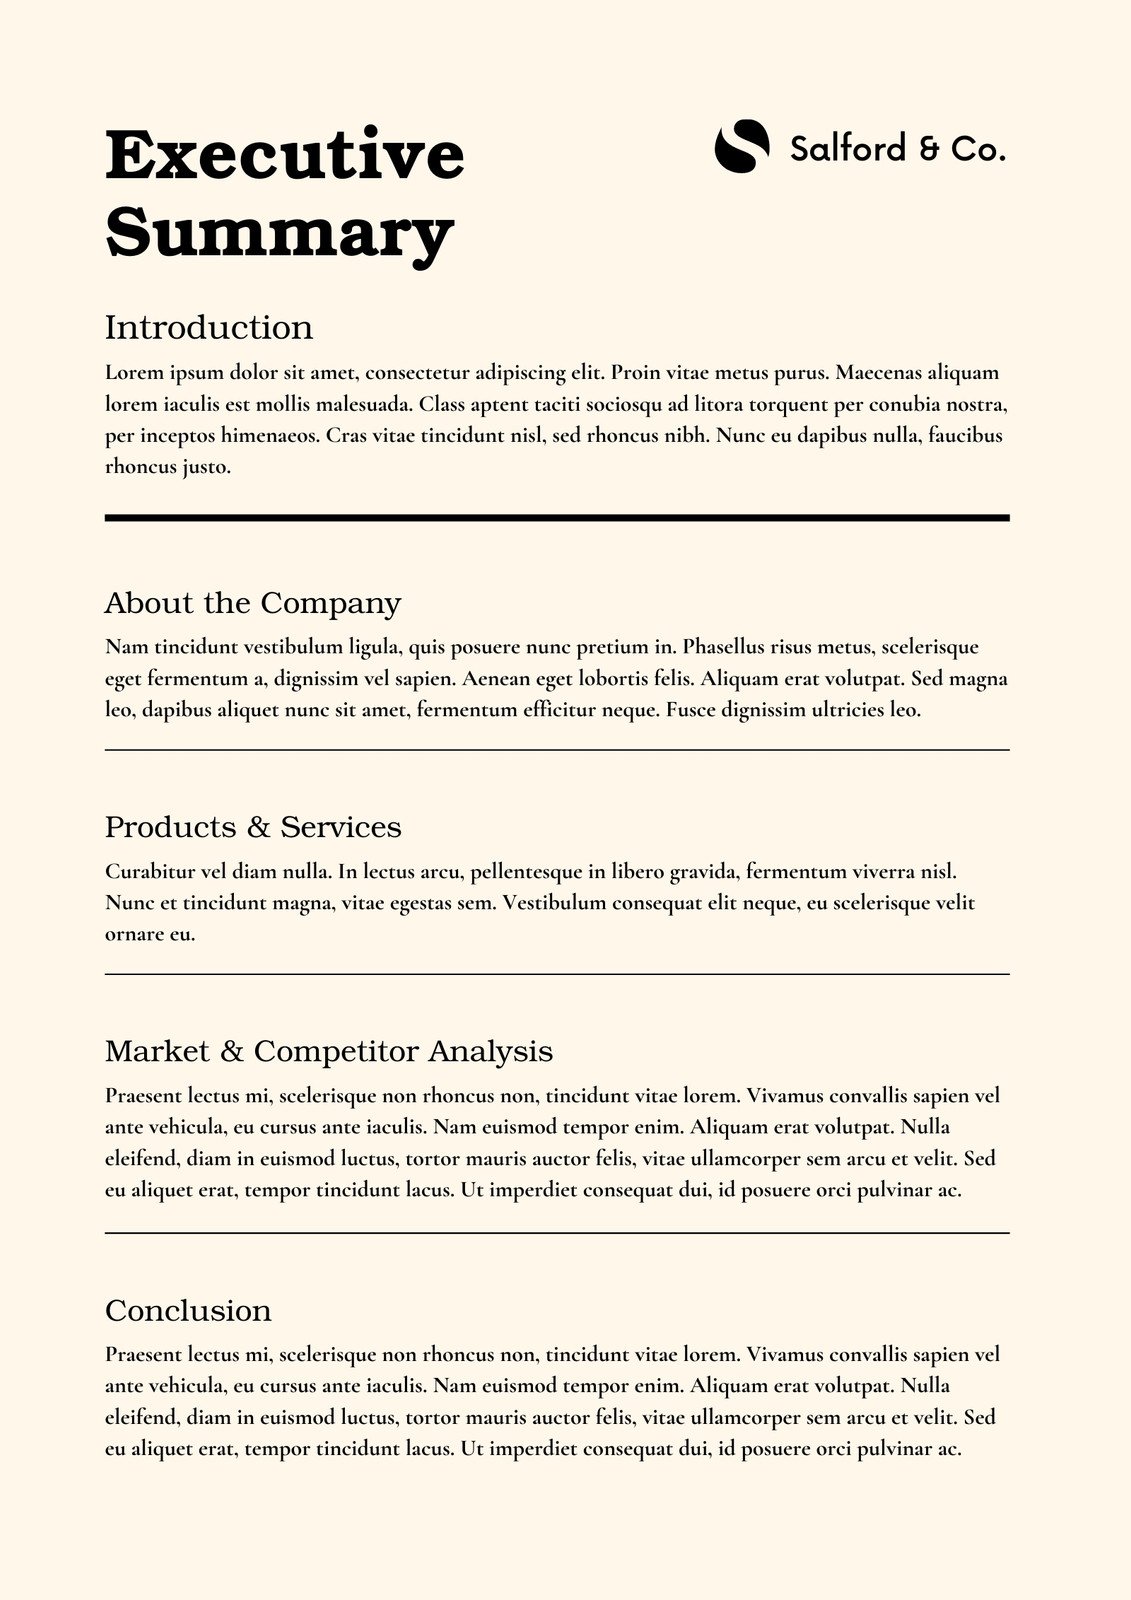 Executive Summary Template For Proposal